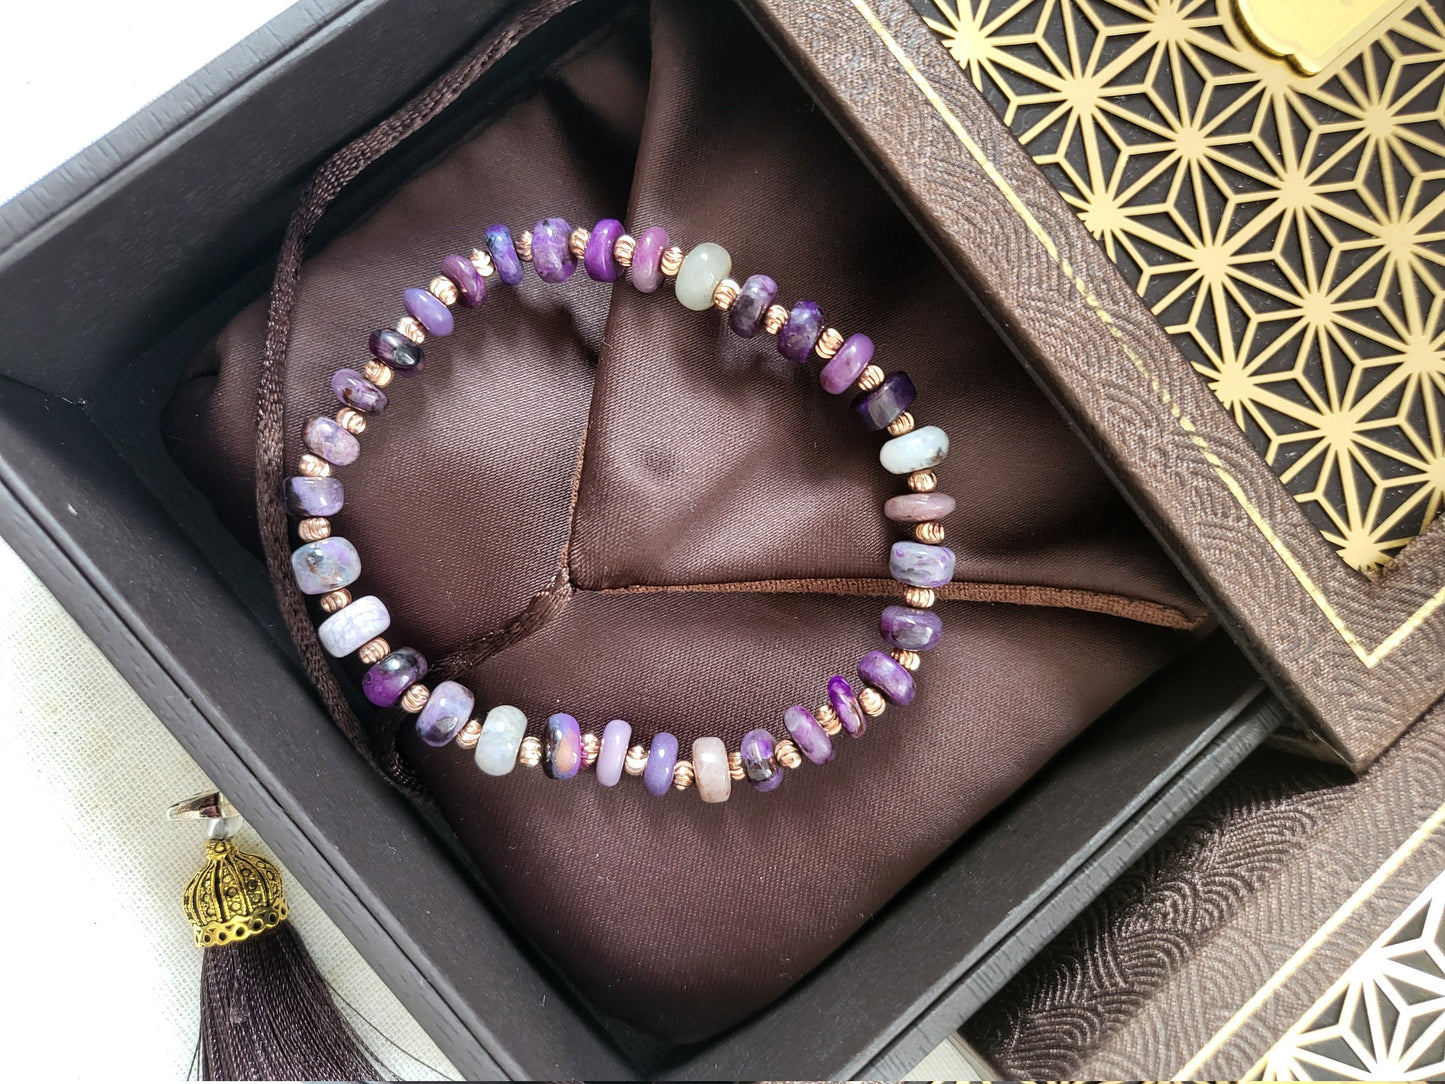 7mm Natural Purple Sugilite Stone bead Crystal Small Stones with Gold Beads Bracelet